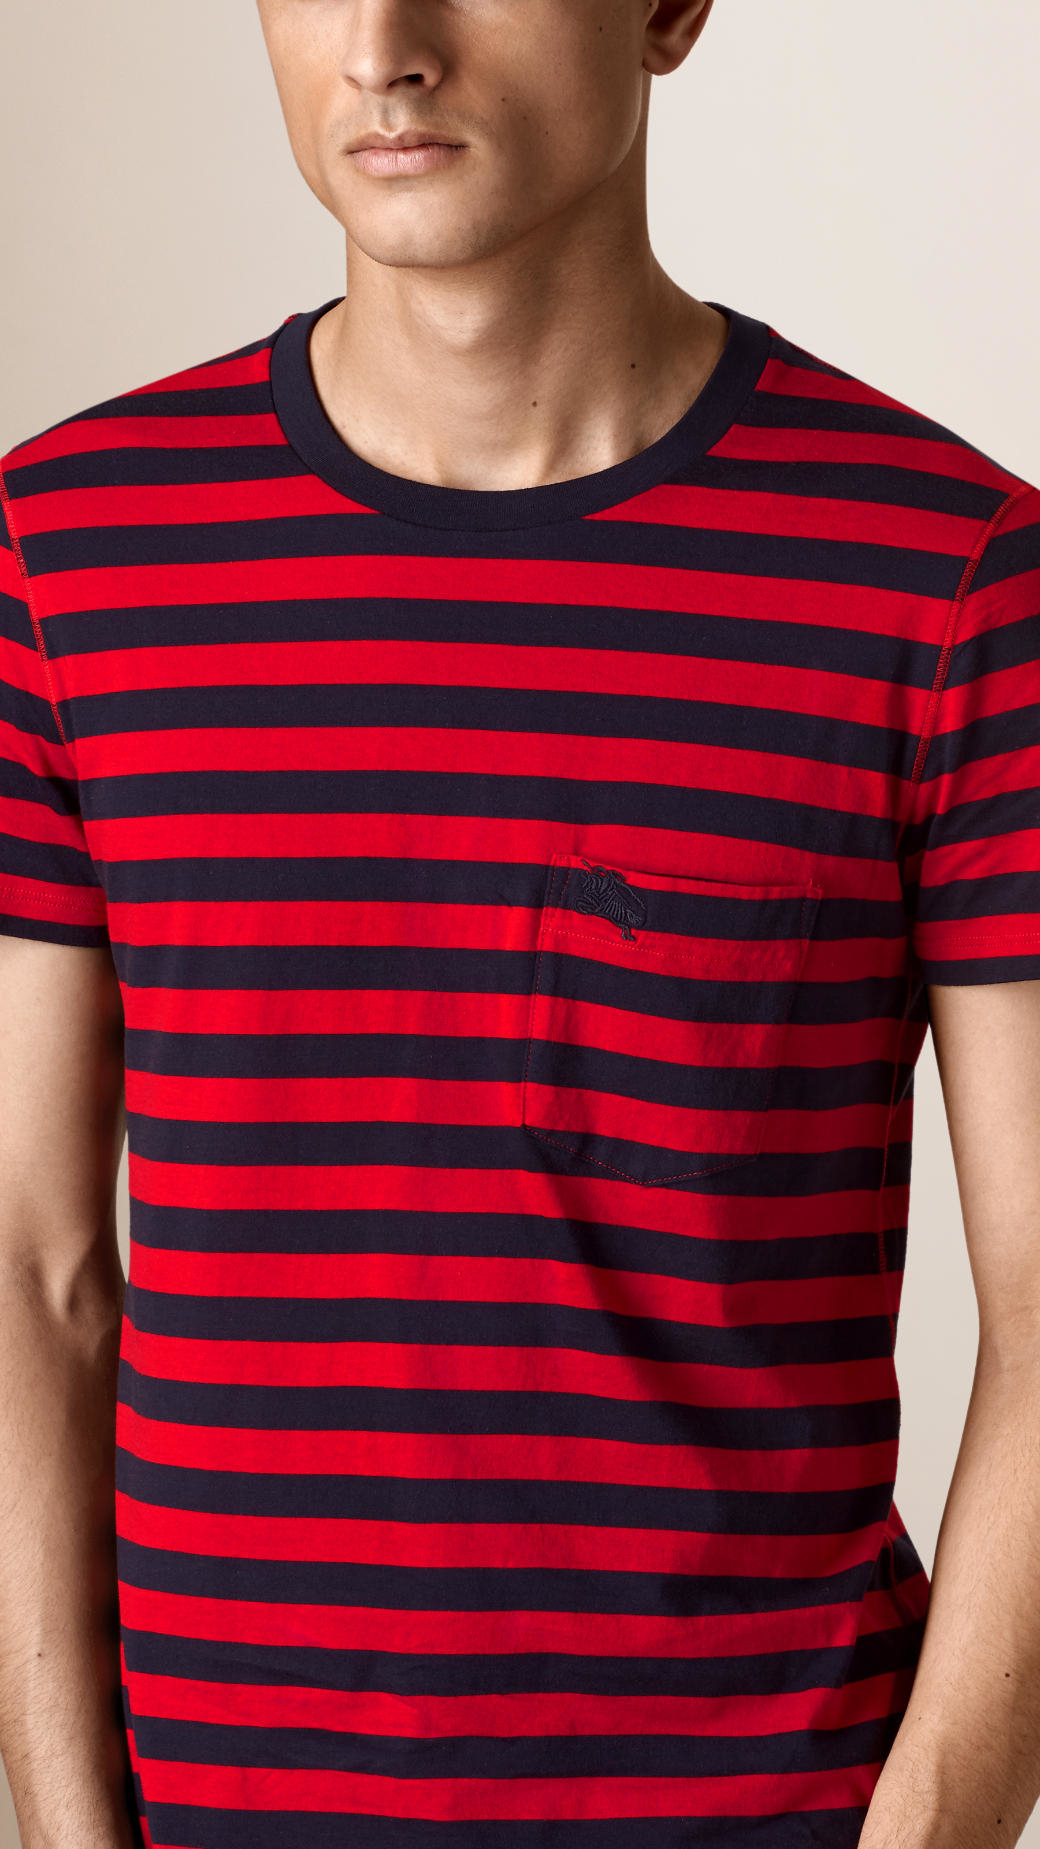 navy and red striped shirt